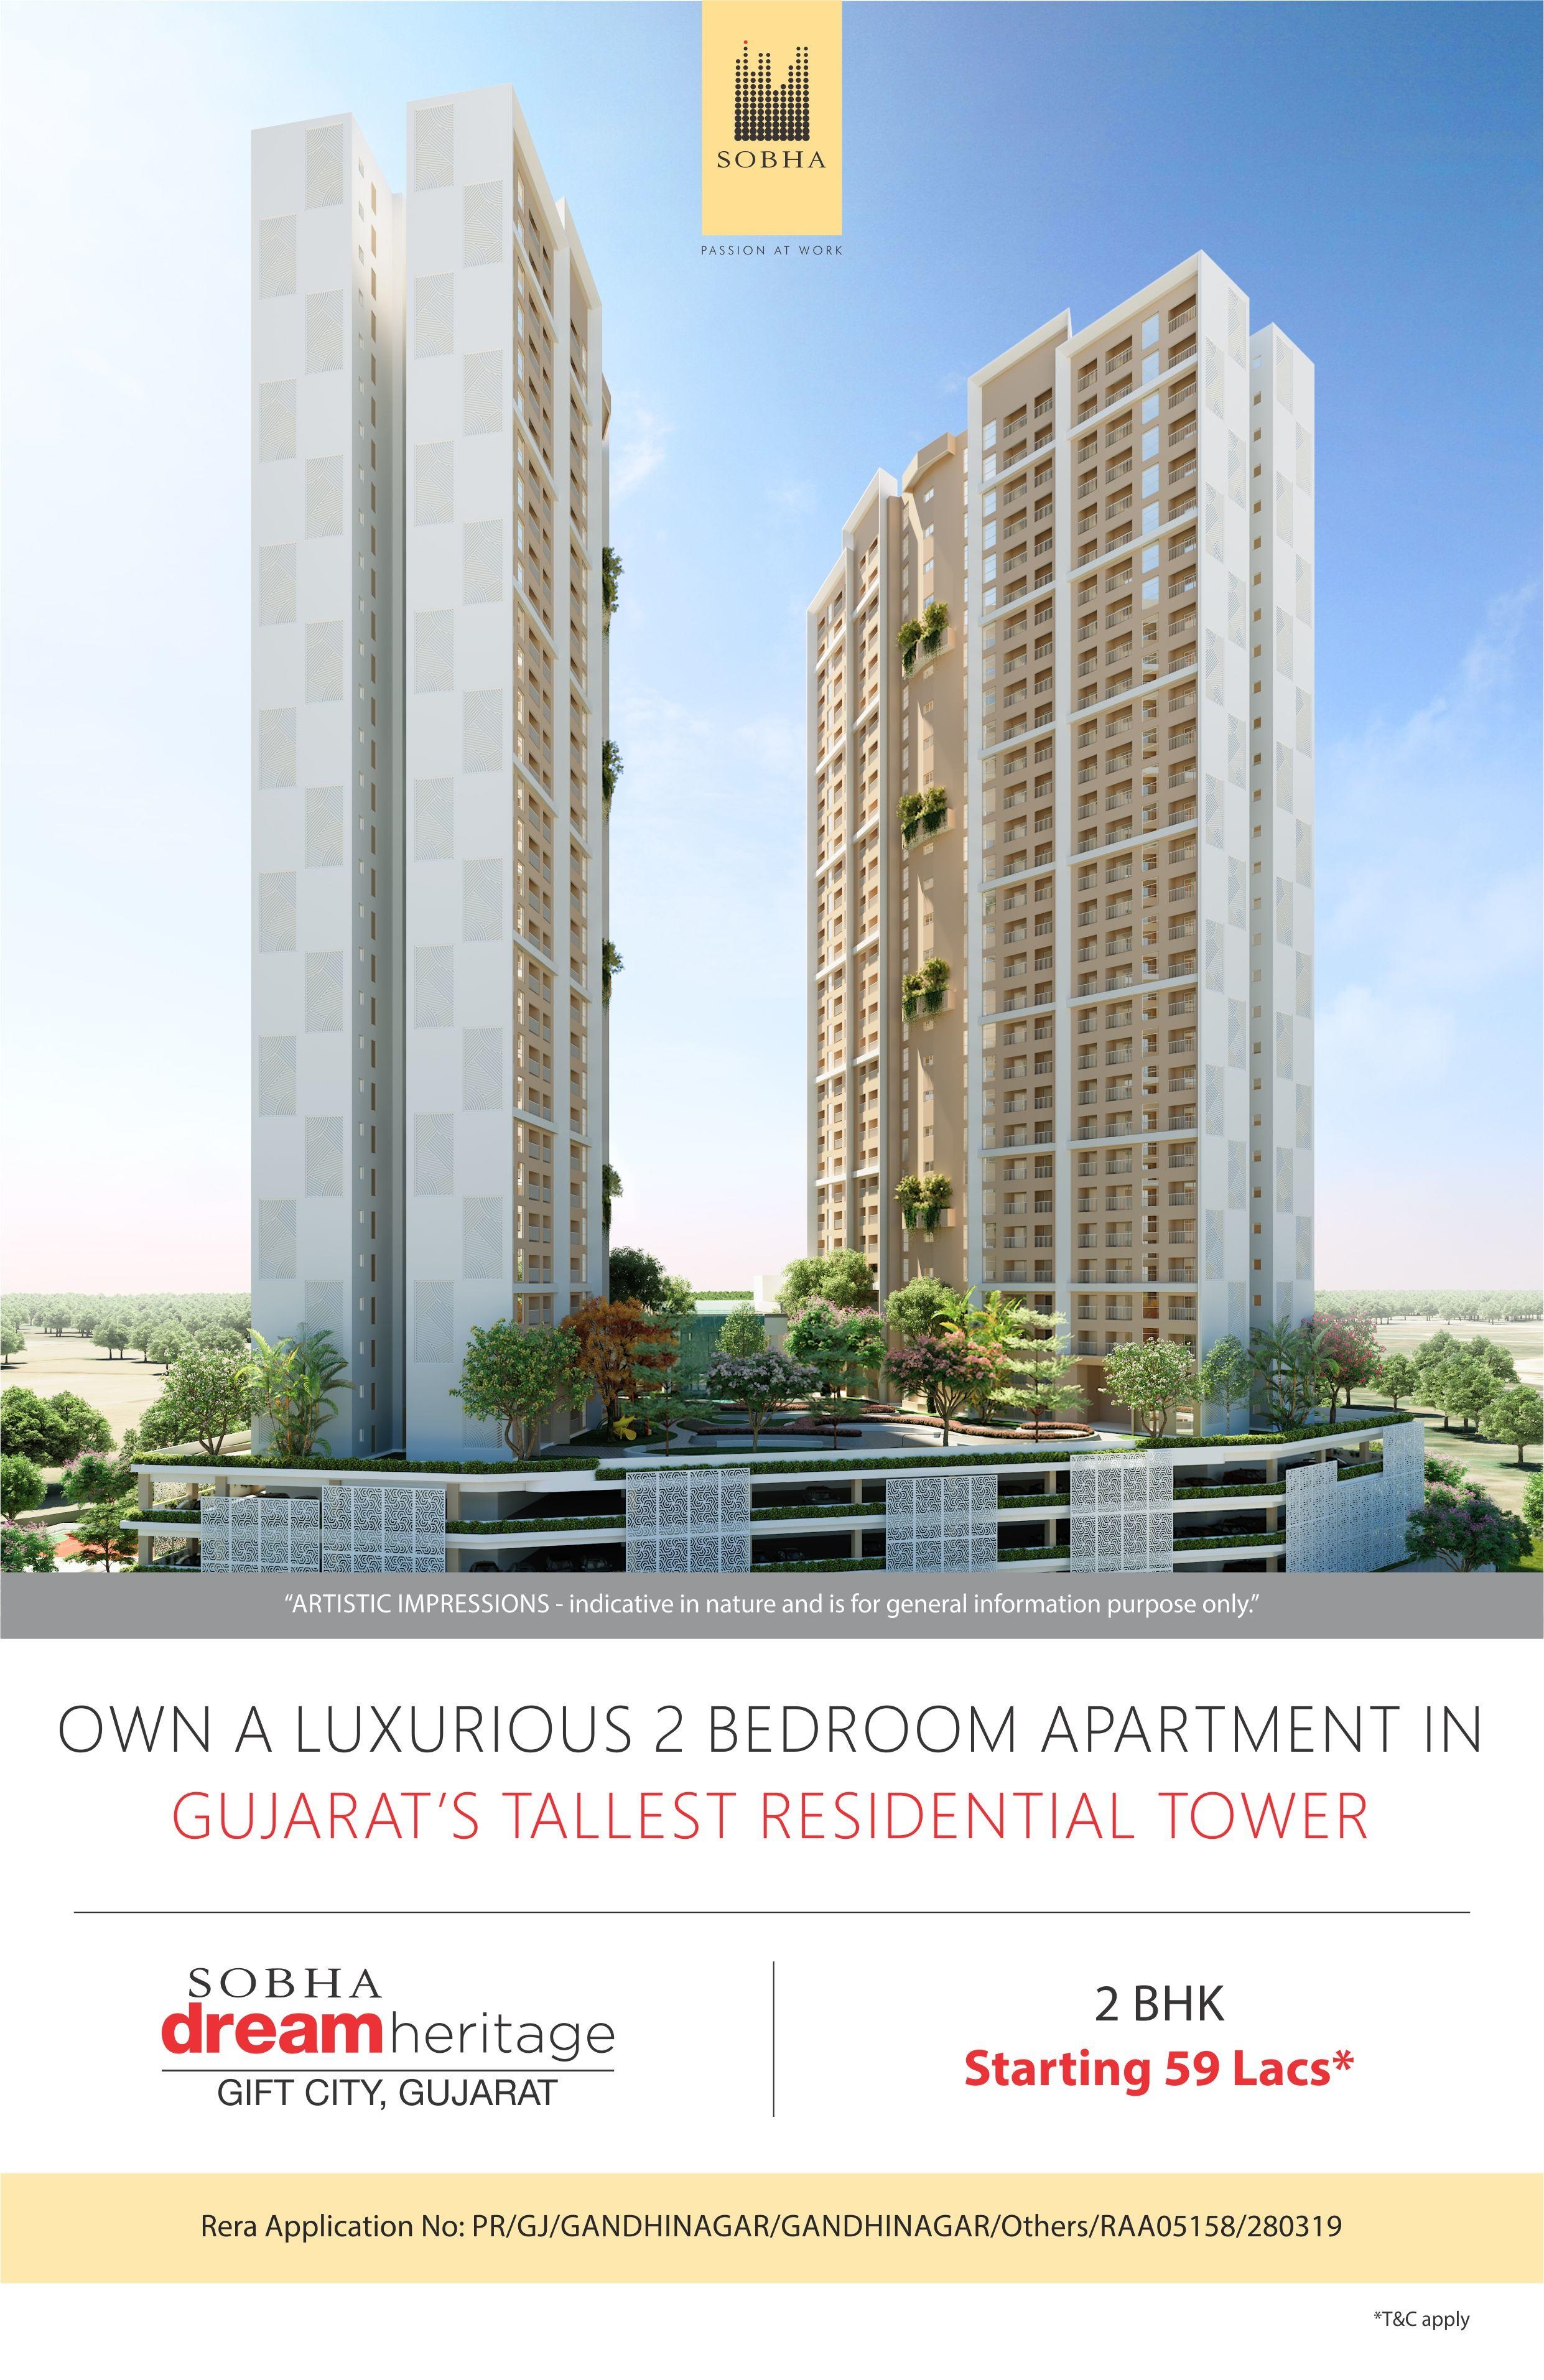 Own a luxurious 2 bedroom residences at Sobha Dream Heritage in Ahmedabad